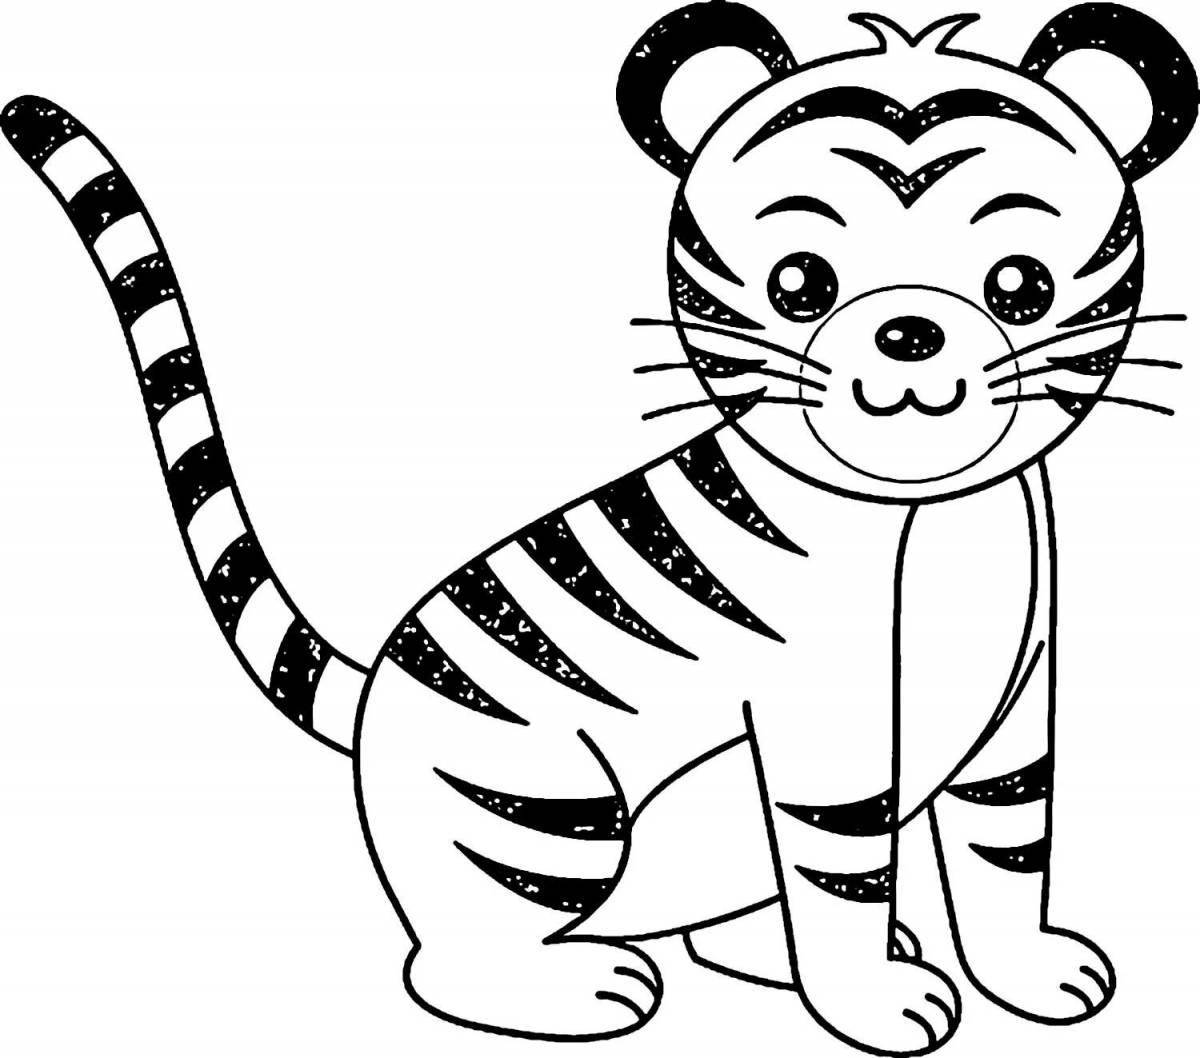 Tempting tiger coloring without stripes